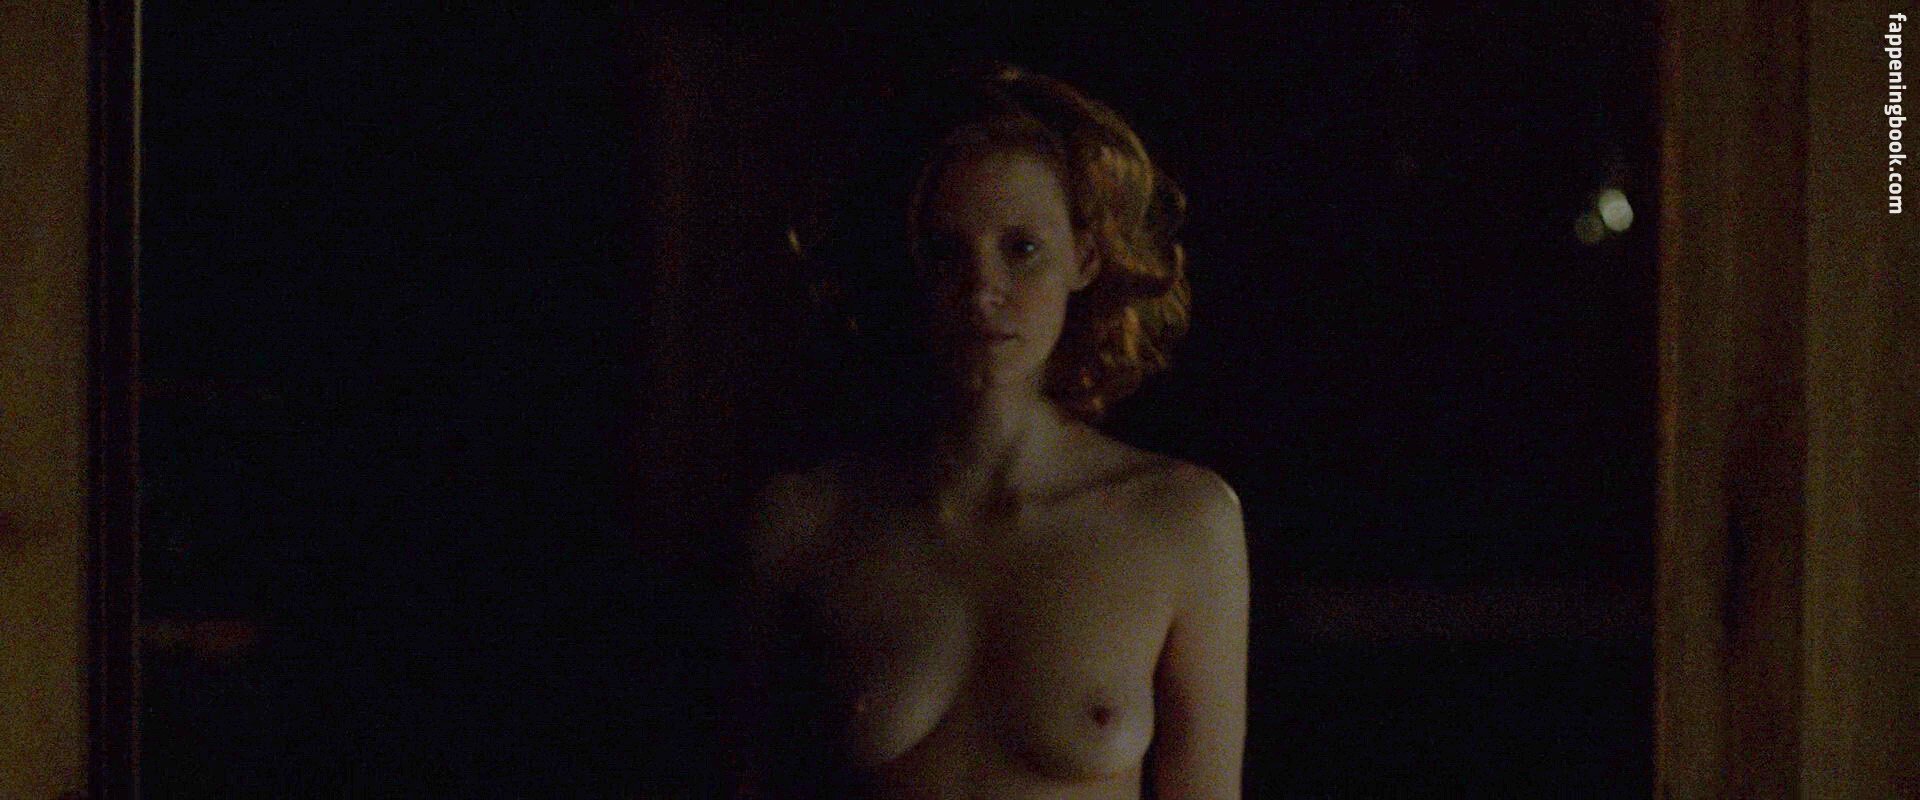 Fappening jessica chastain Jessica Chastain